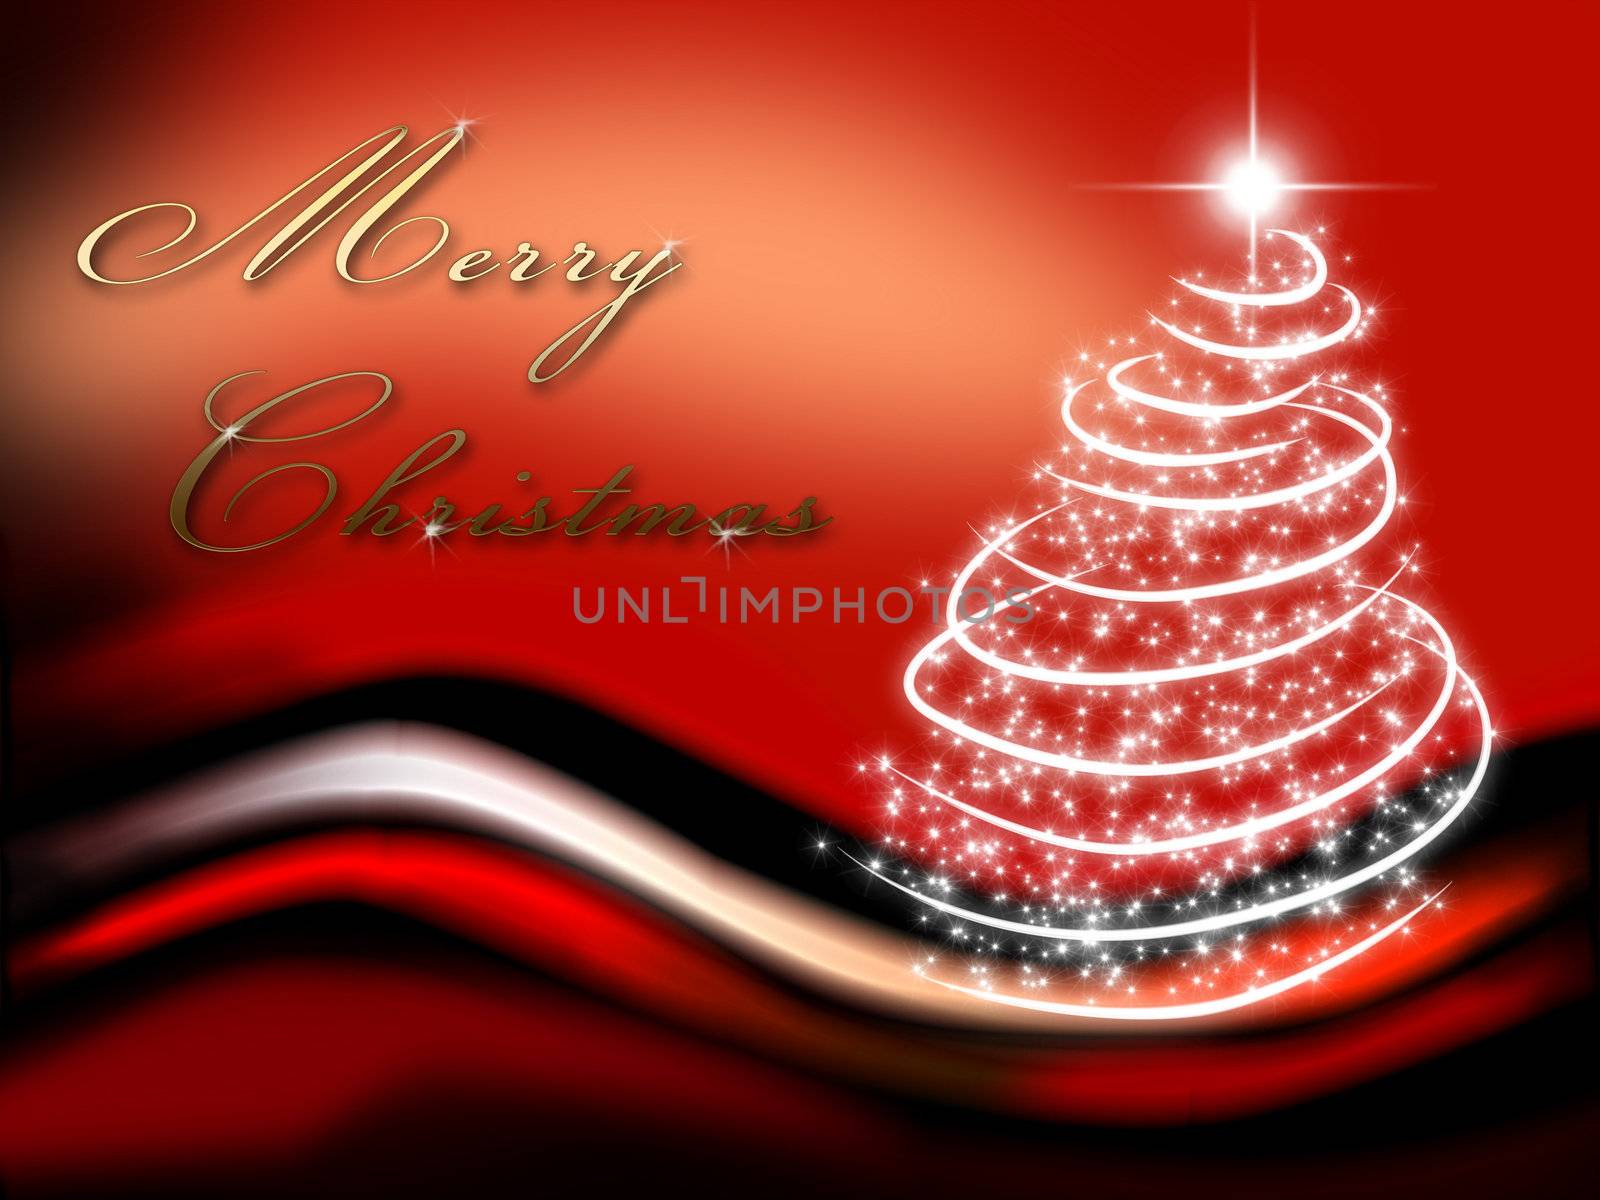 christmas background for your designs with a christmas tree an Merry Christmas Text